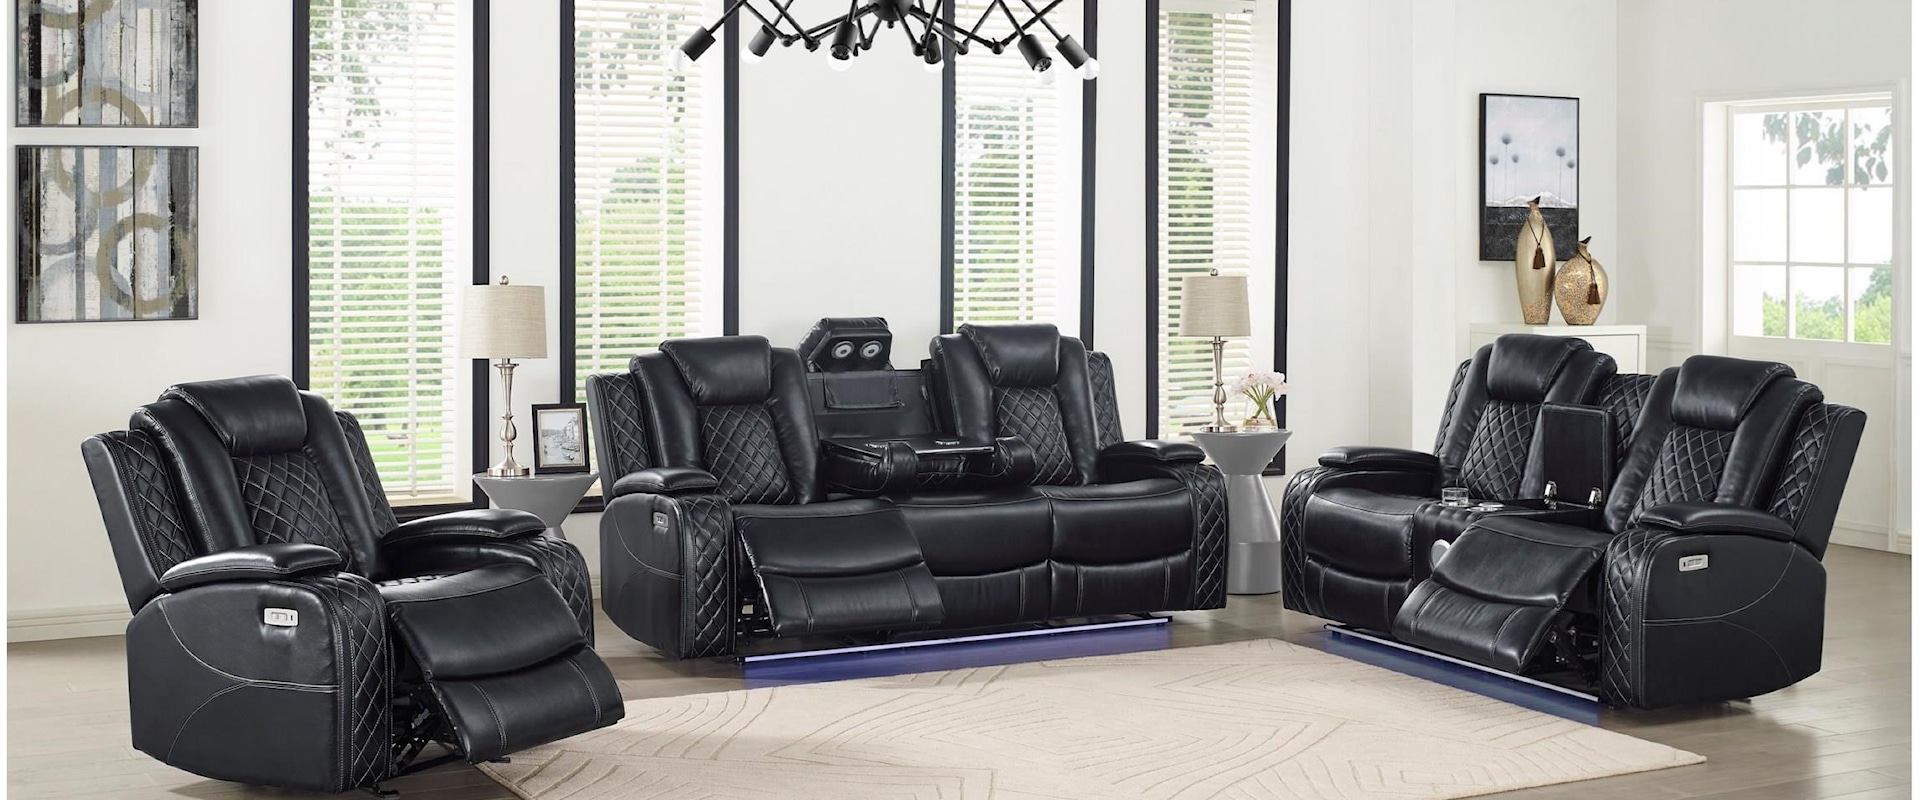 POWER 2 SOFA LOVESEAT AND RECLINER